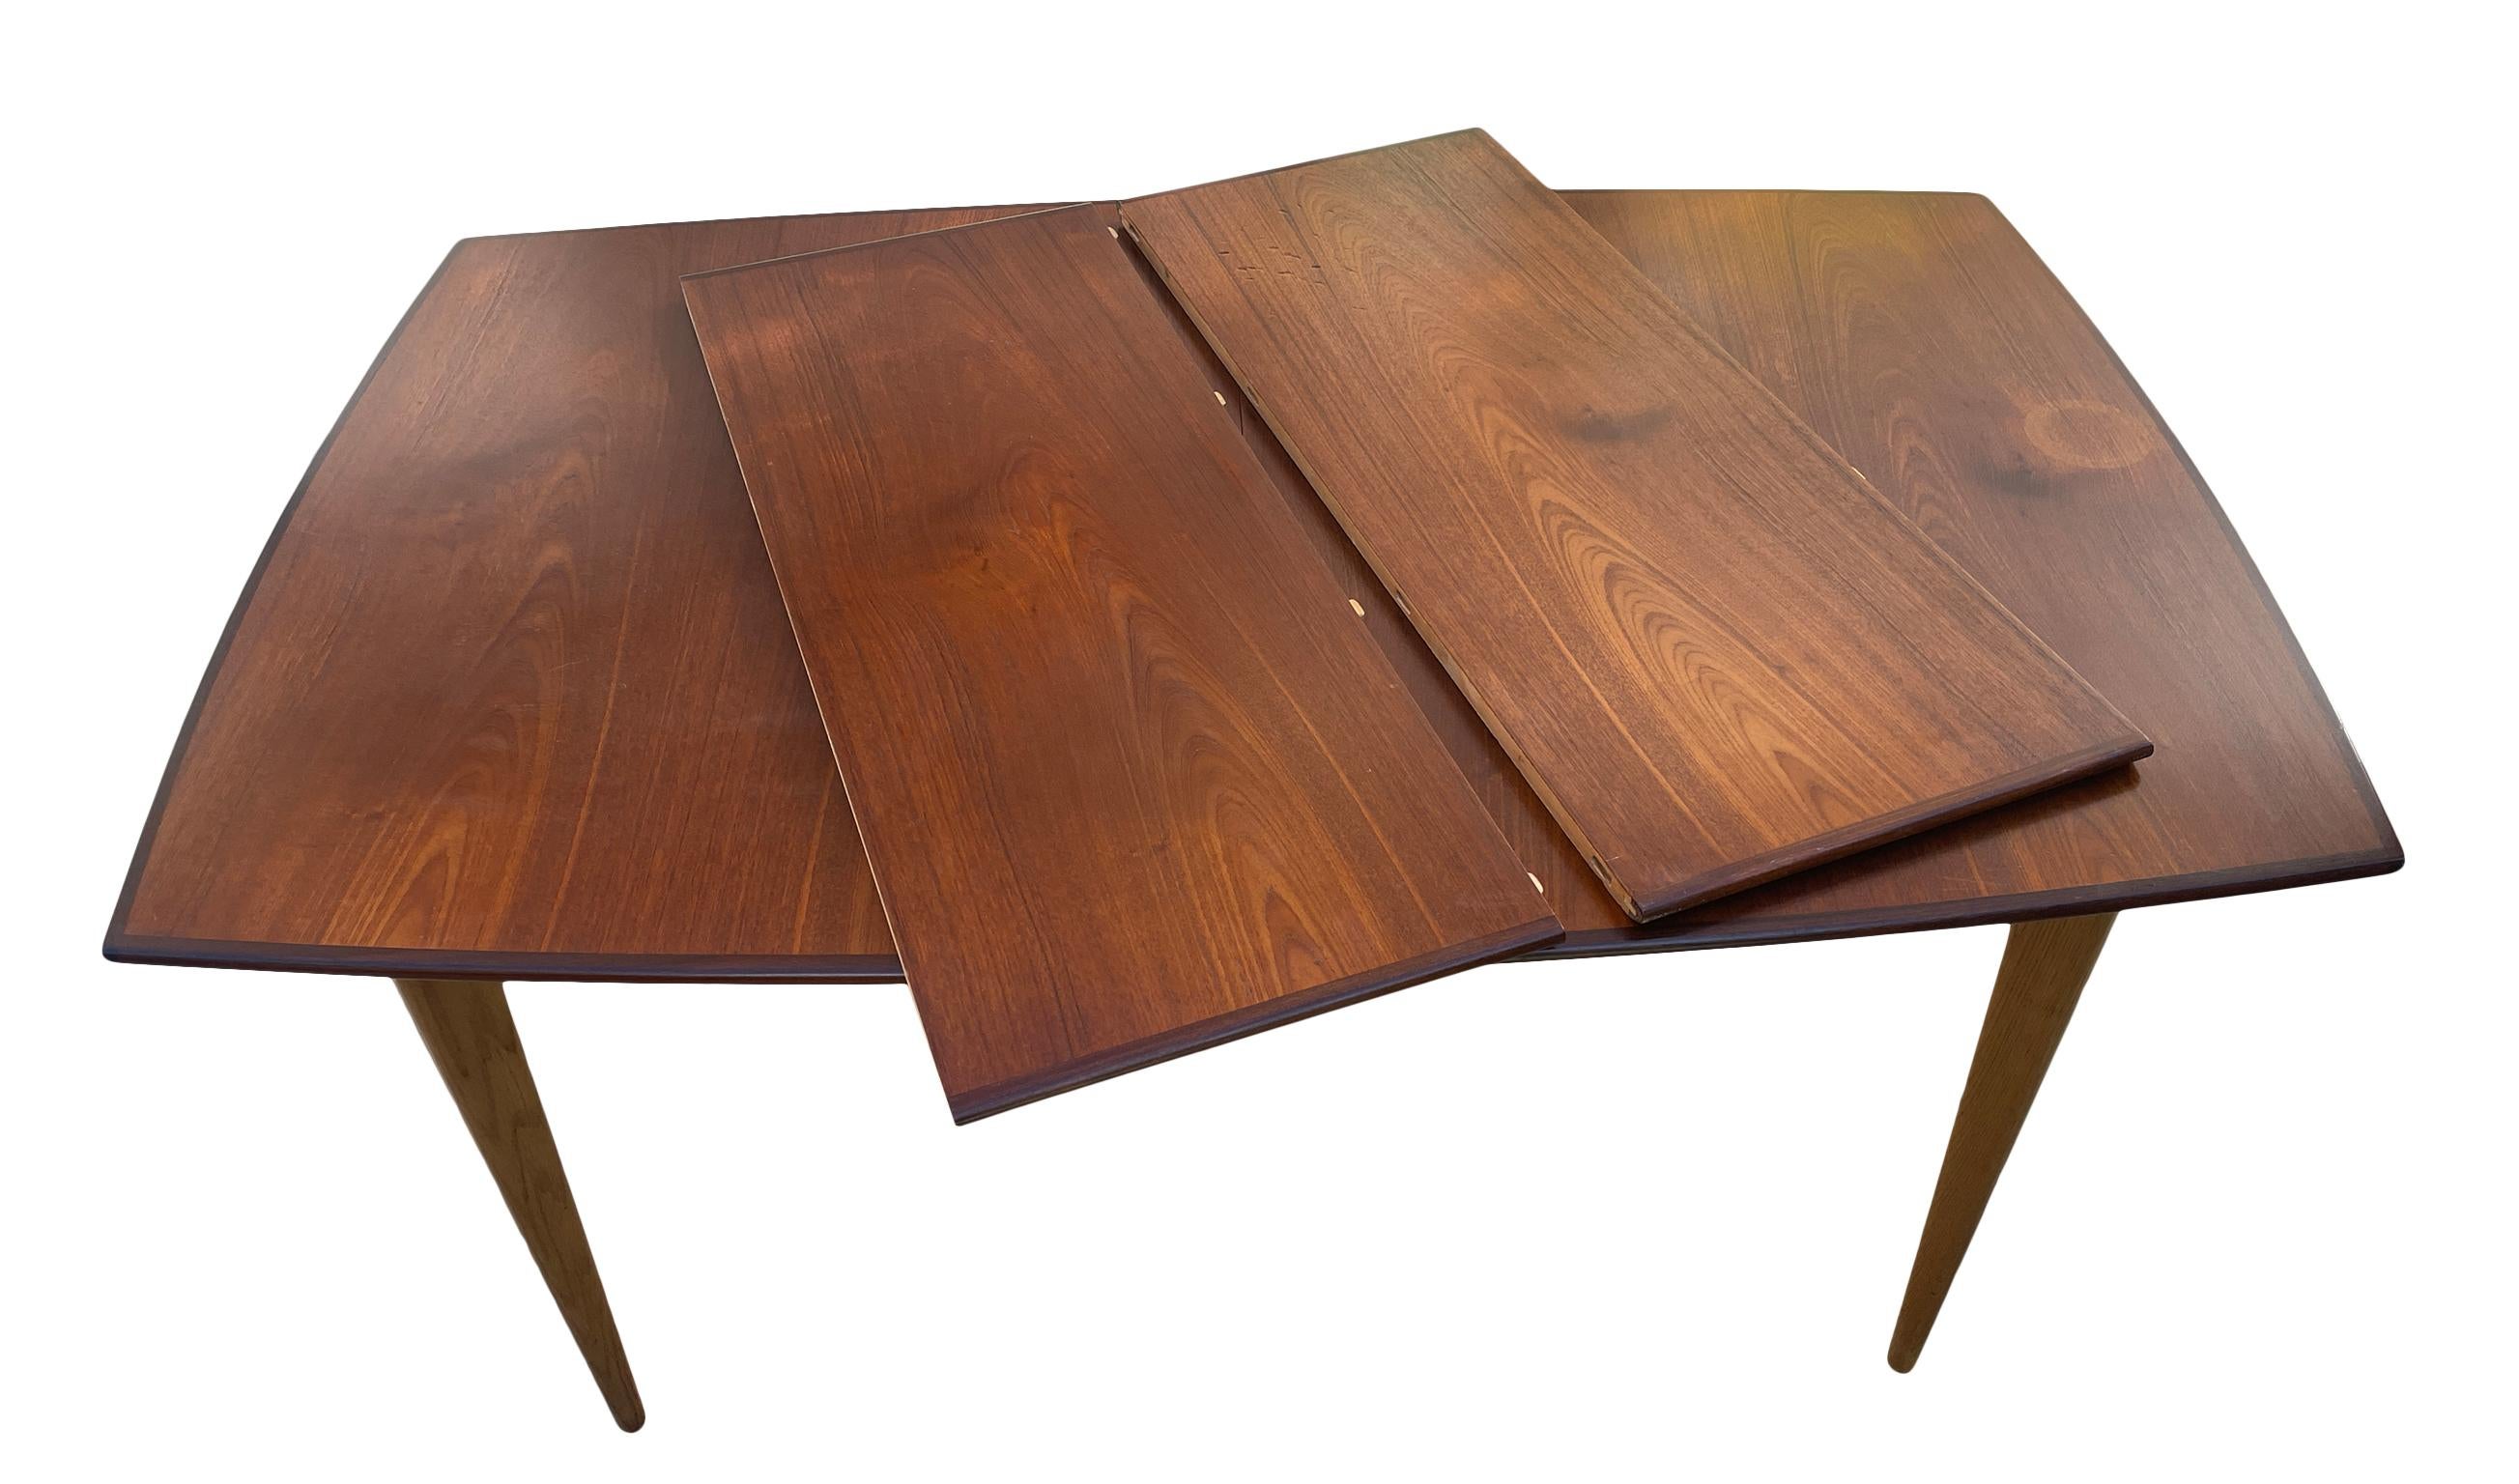 Mid Century Modern Swedish teak Dining table with 2 leaves. Top is made of to teak with rosewood edges and the base and legs are light solid oak. Very unique medium sized dining table. Labeled JOC Mobler Made in Sweden Very Clean Table. Great